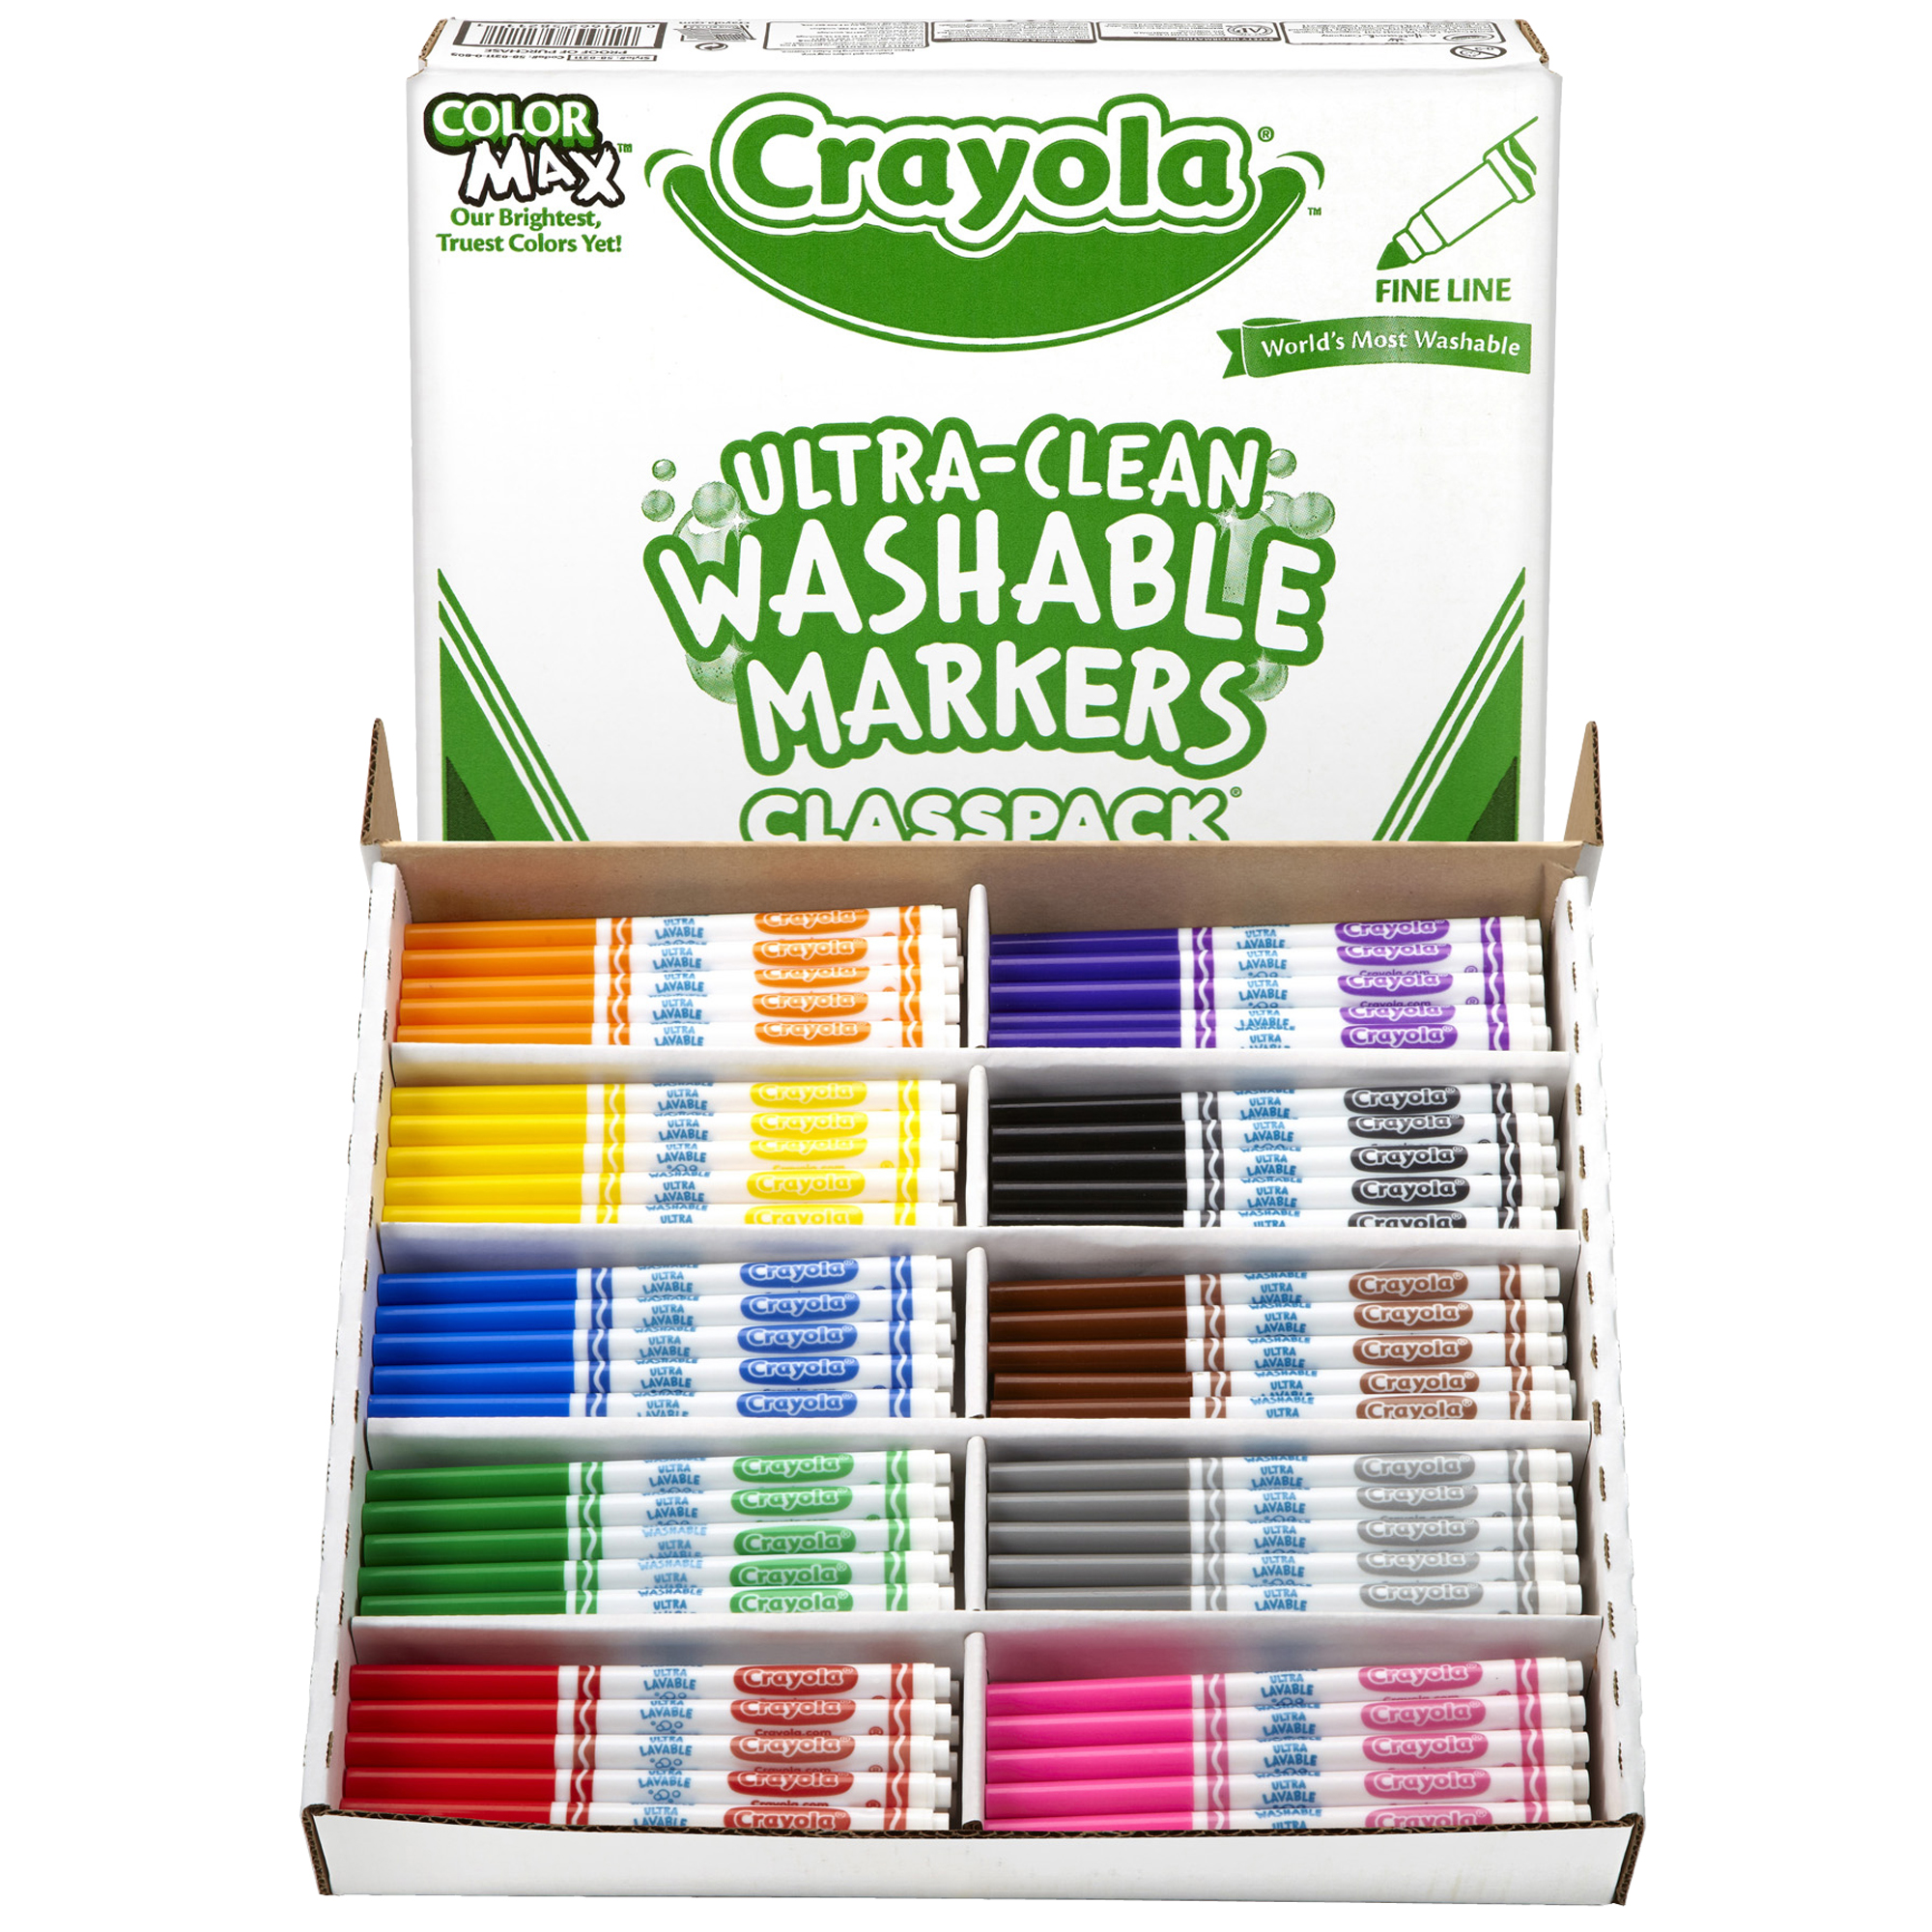 MARKERS WASHABLE THIN 10 COLOR